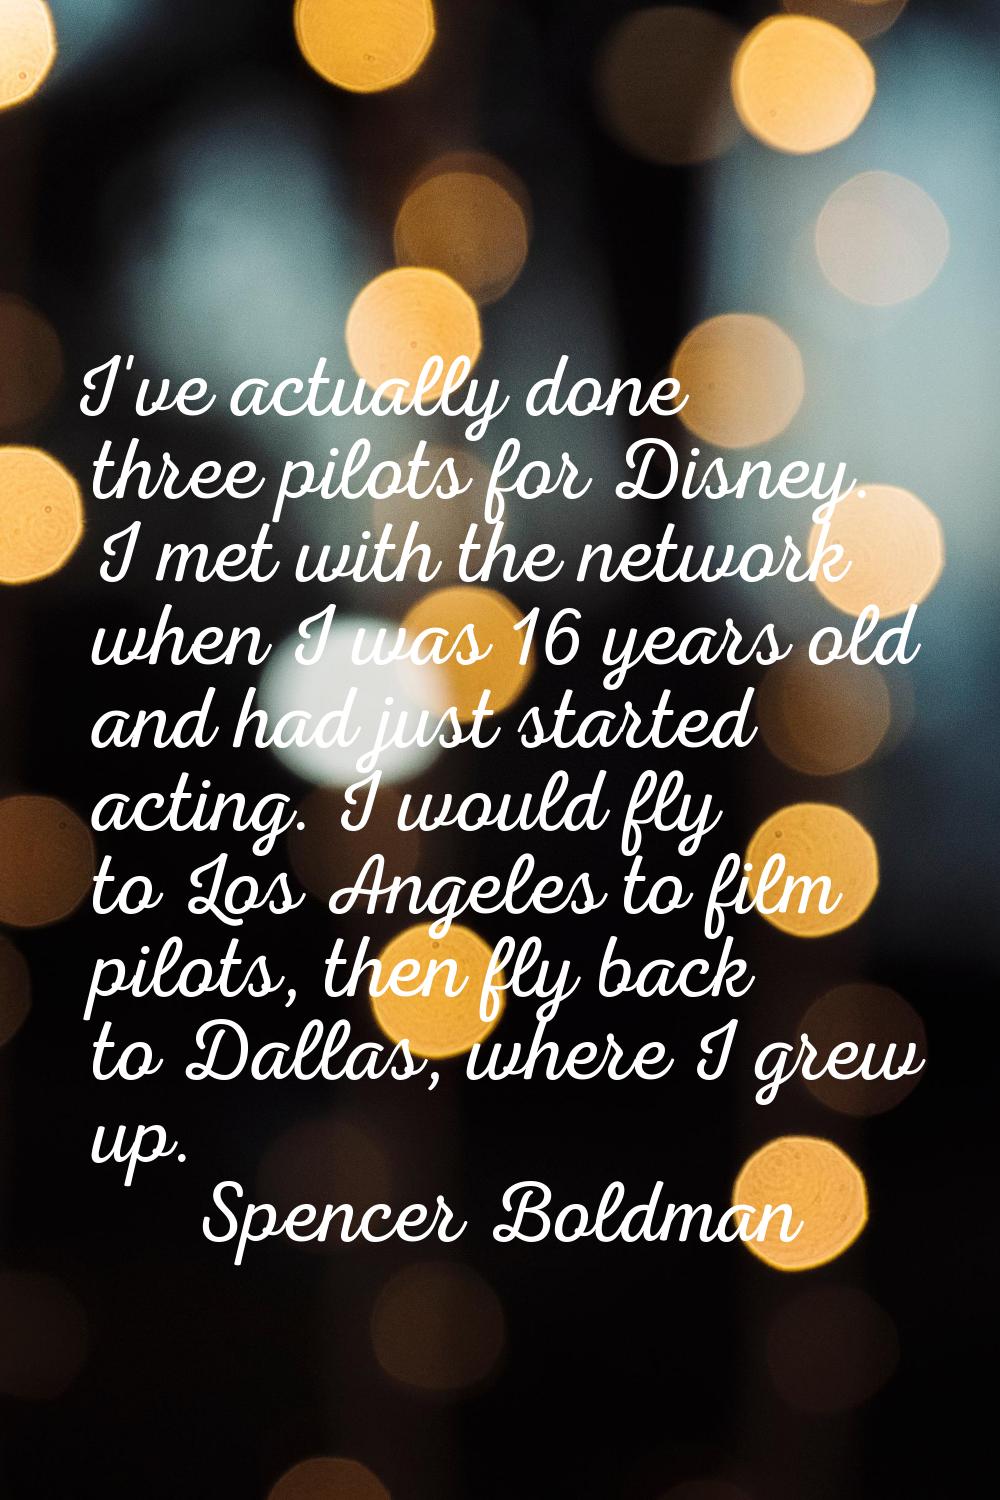 I've actually done three pilots for Disney. I met with the network when I was 16 years old and had 